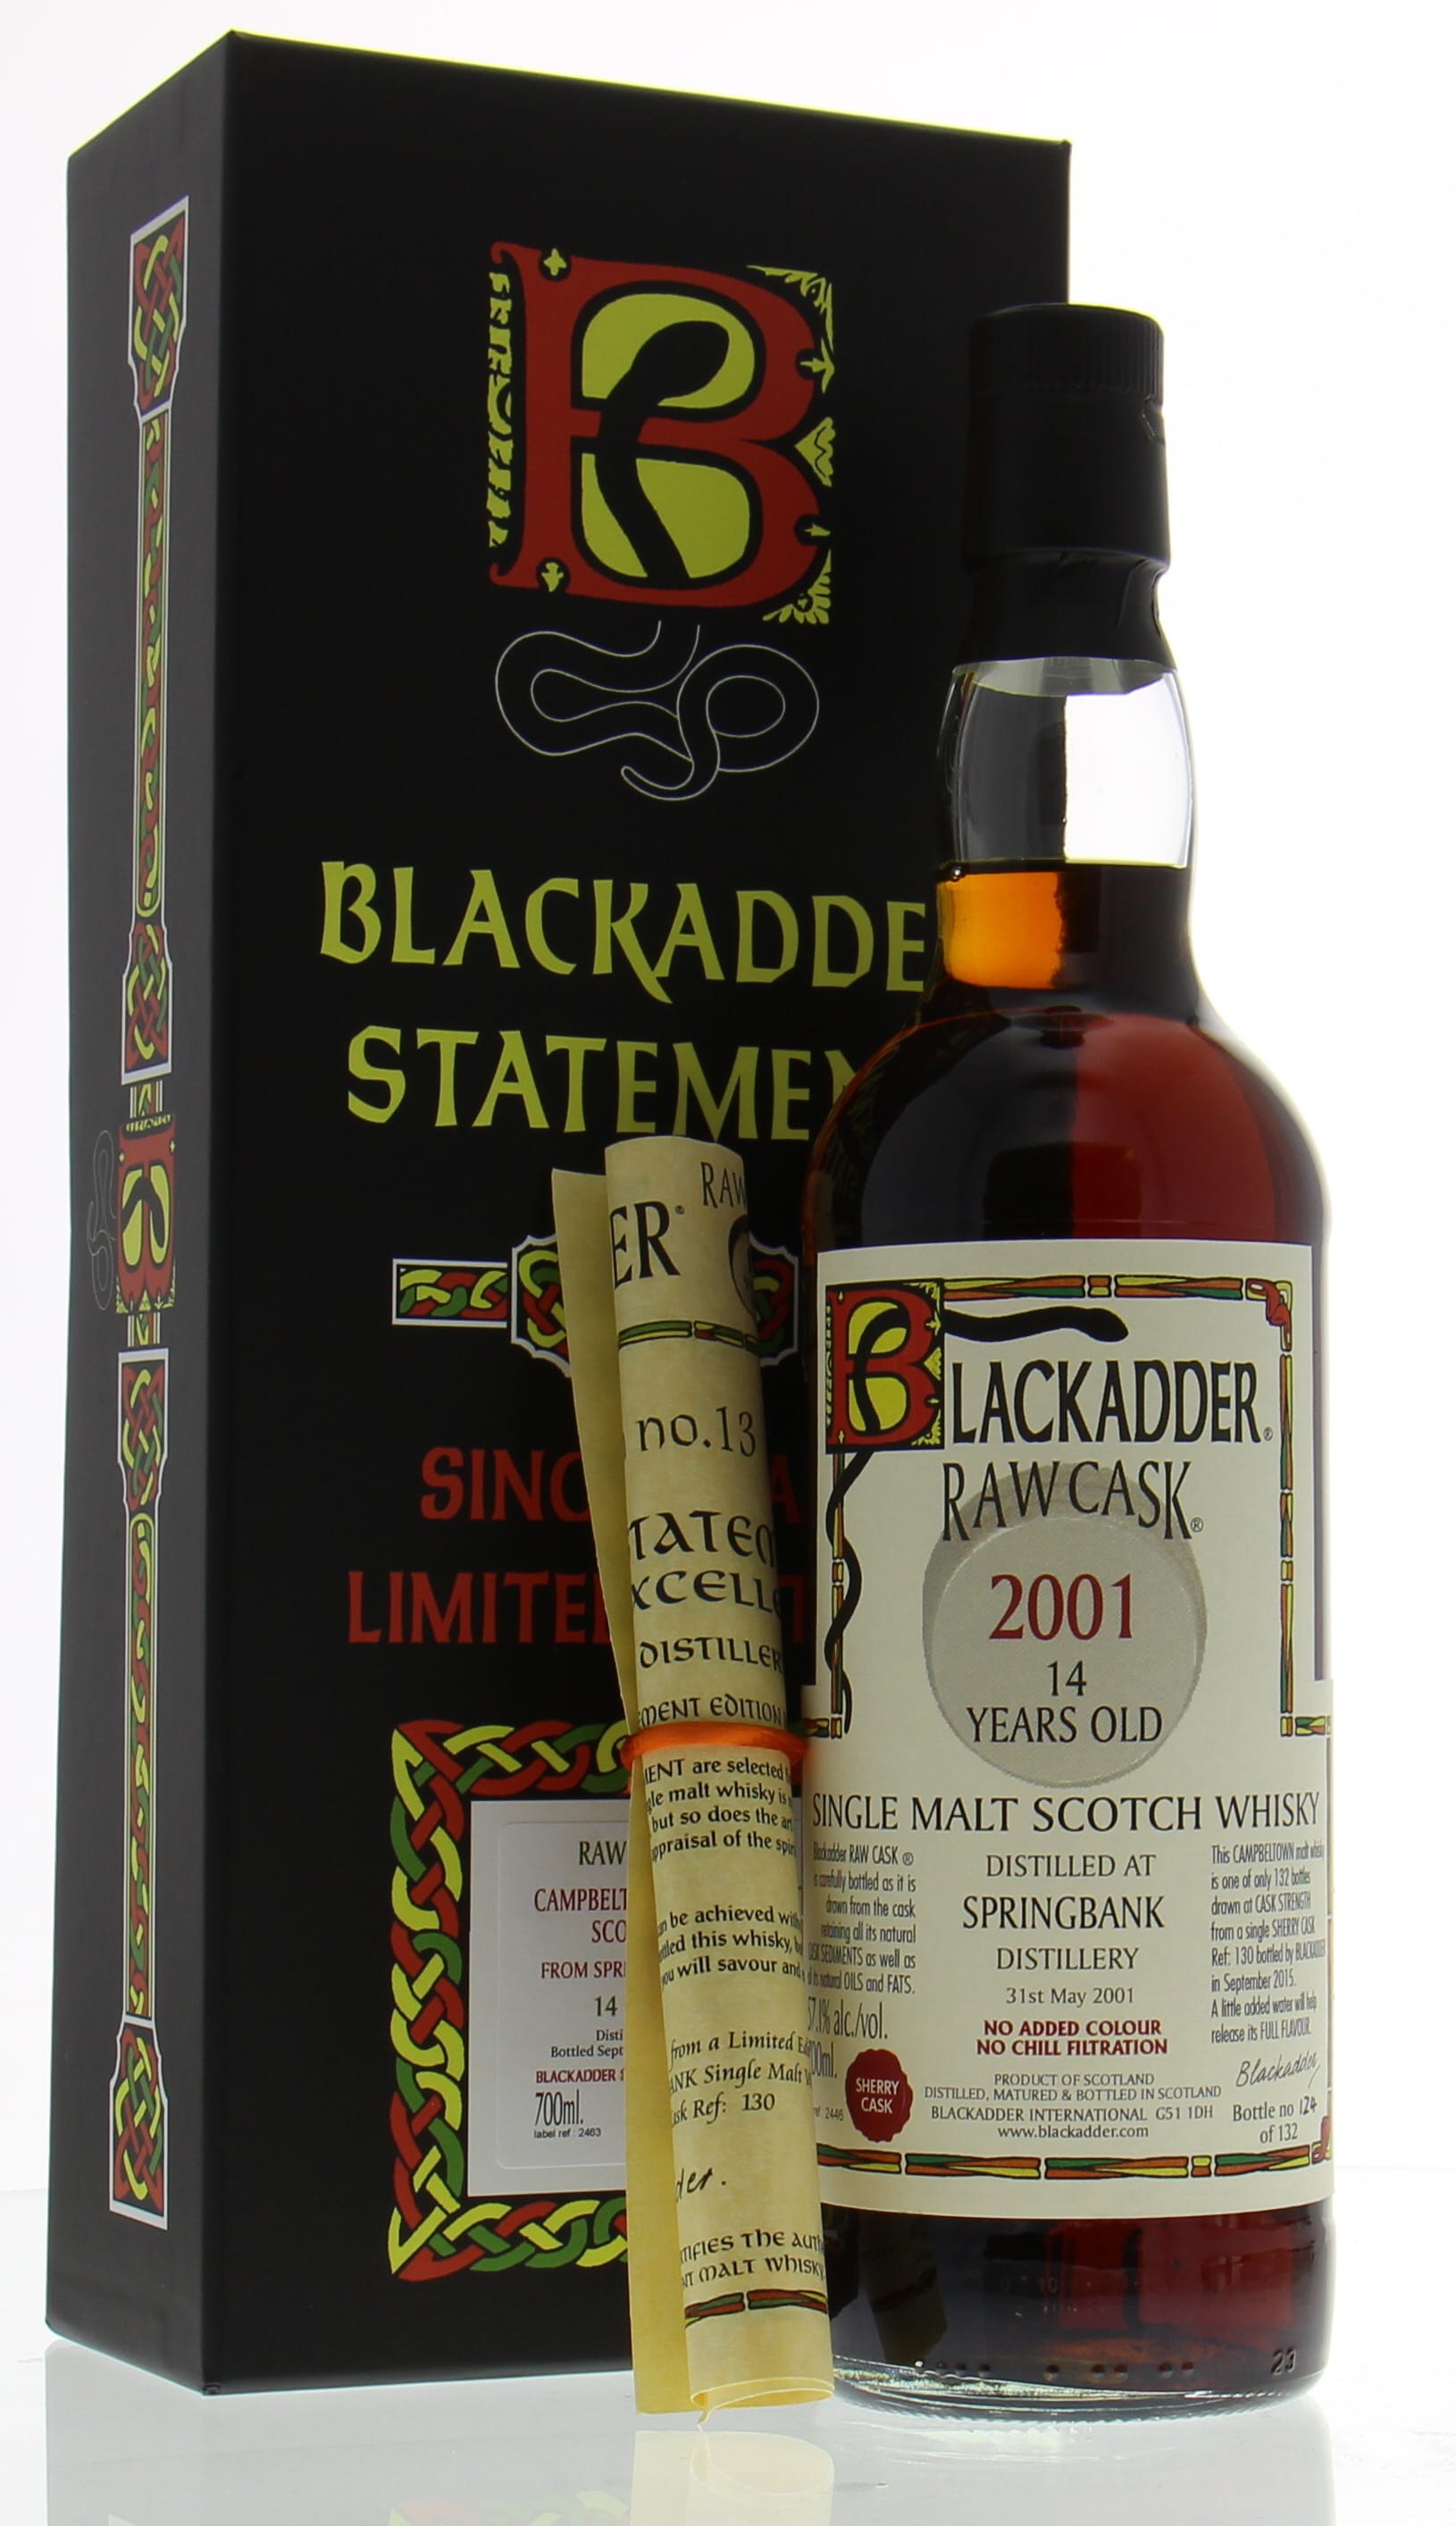 Springbank - 14 Years Old Blackadder Sherry Cask Nr:130 57.1% 2001 In Original Container